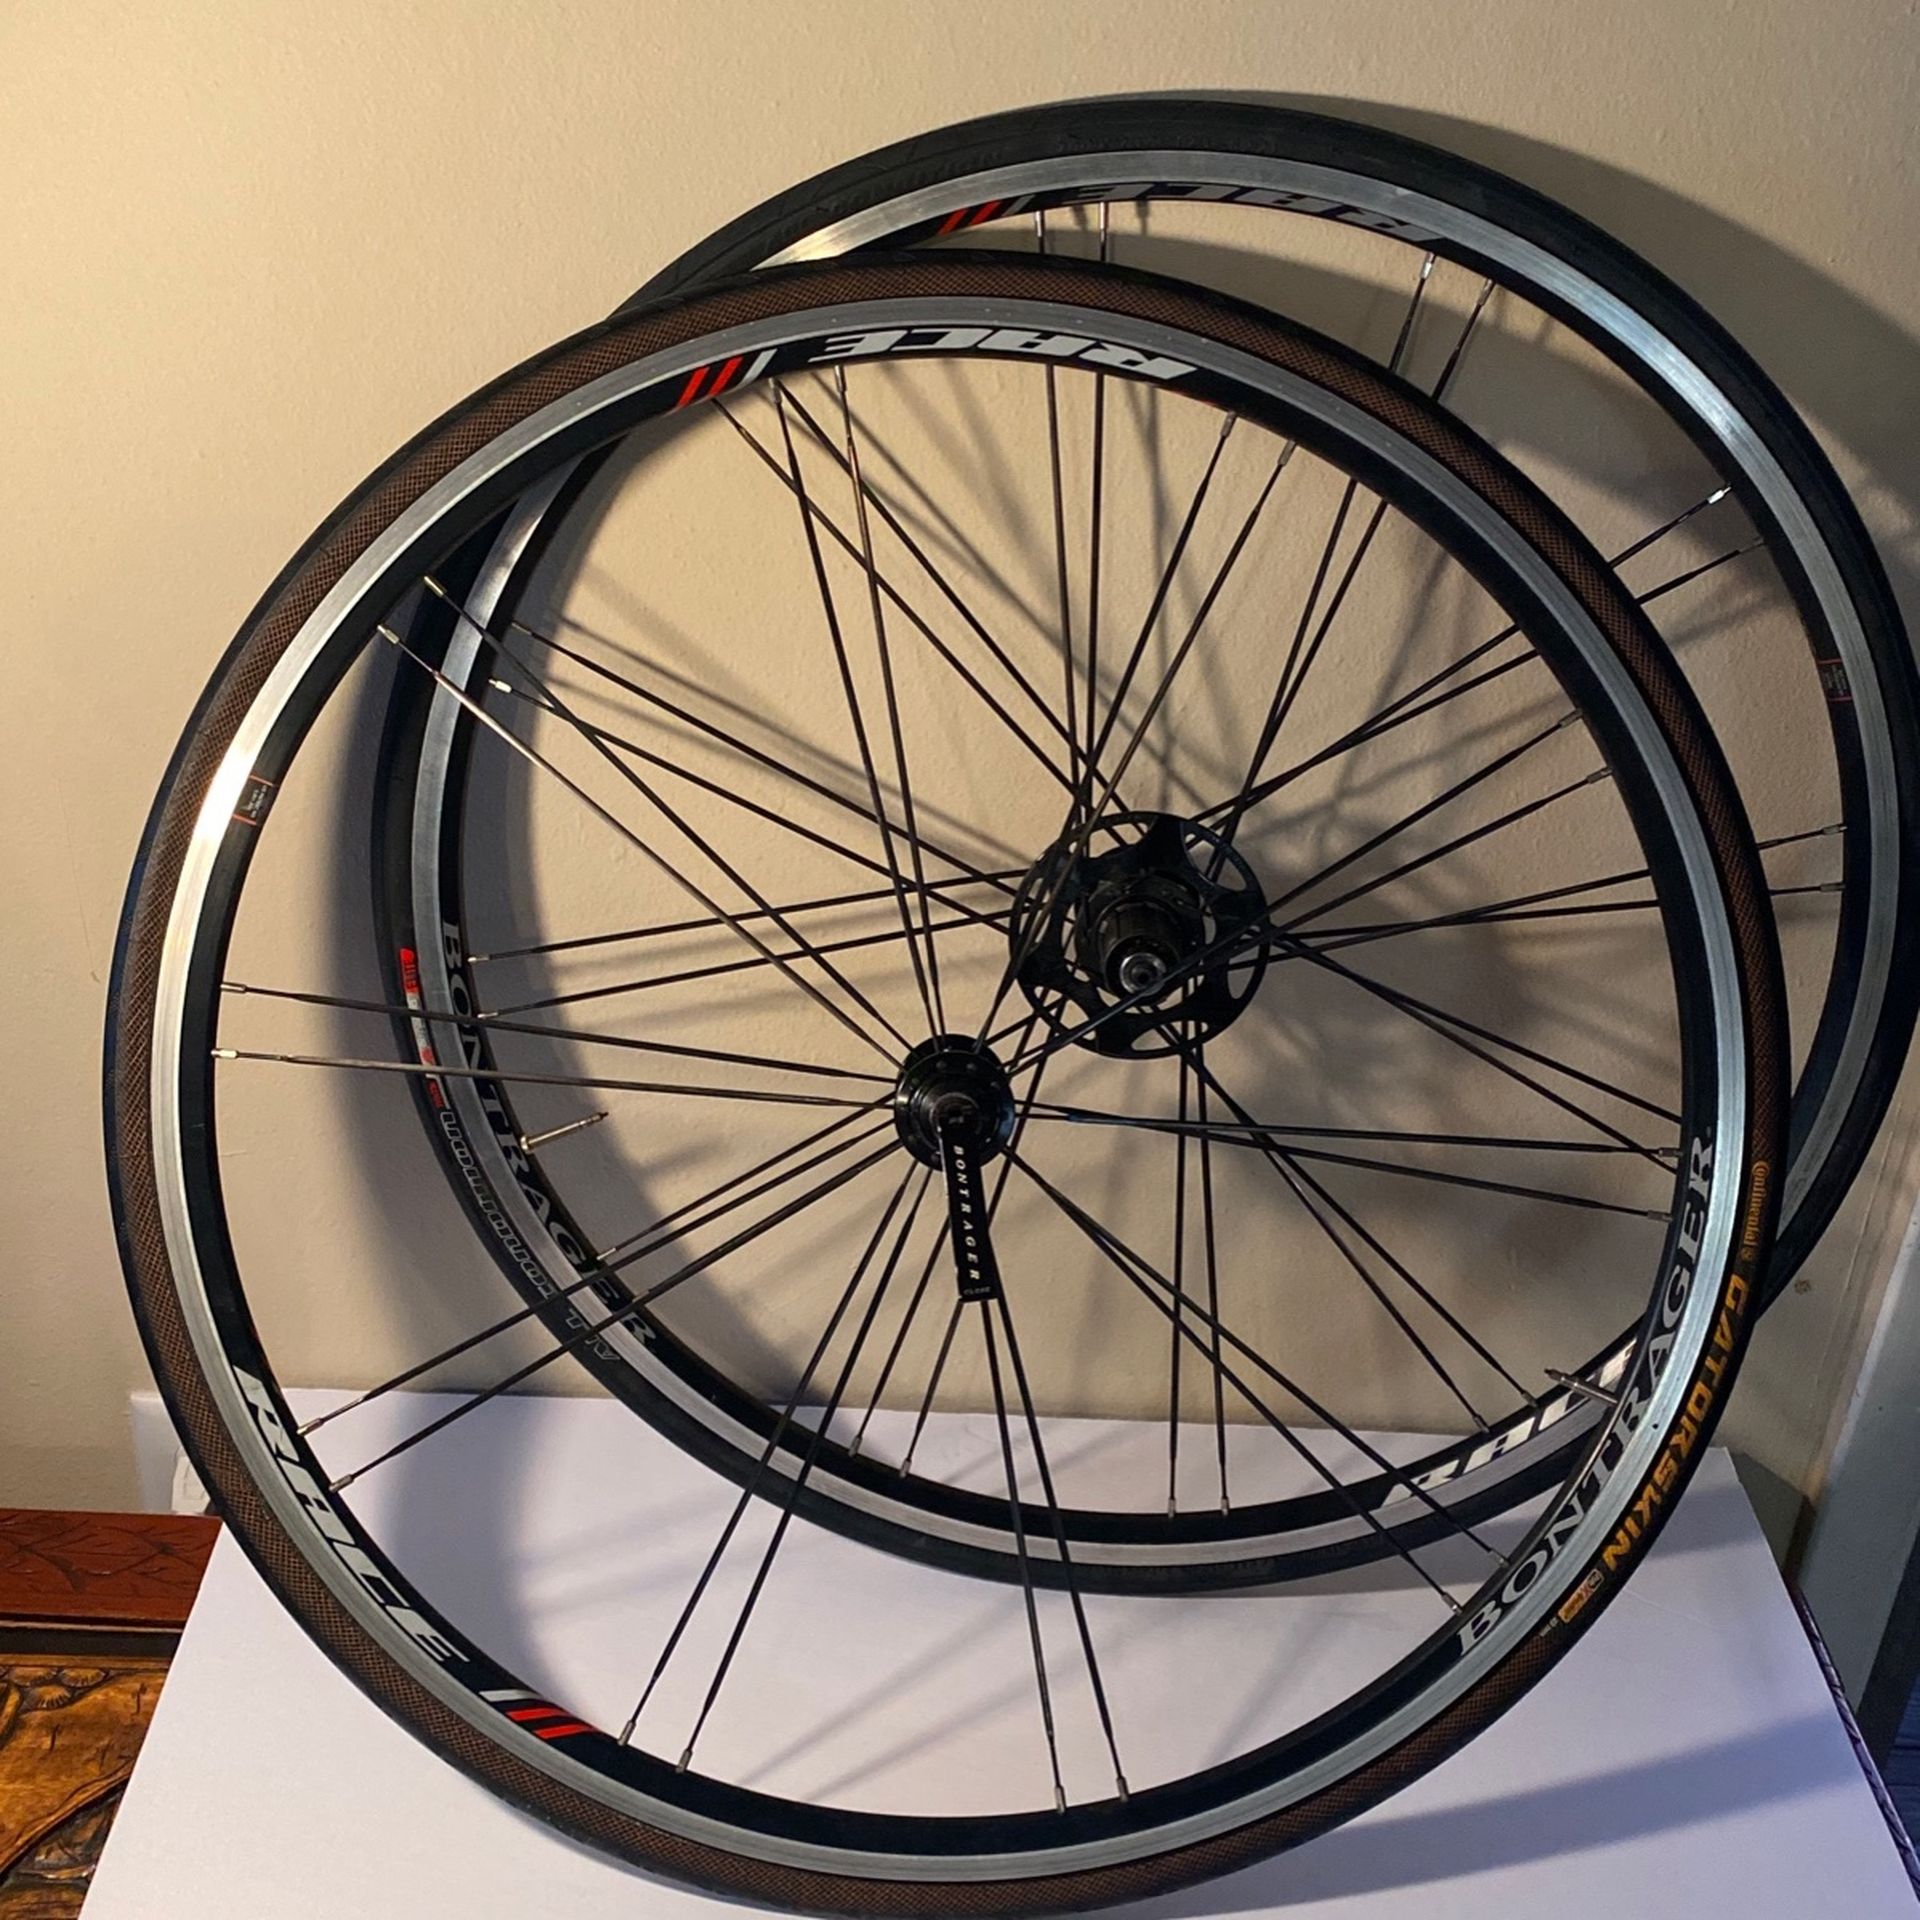 Bontrager 10 Speed Wheelset With Tires